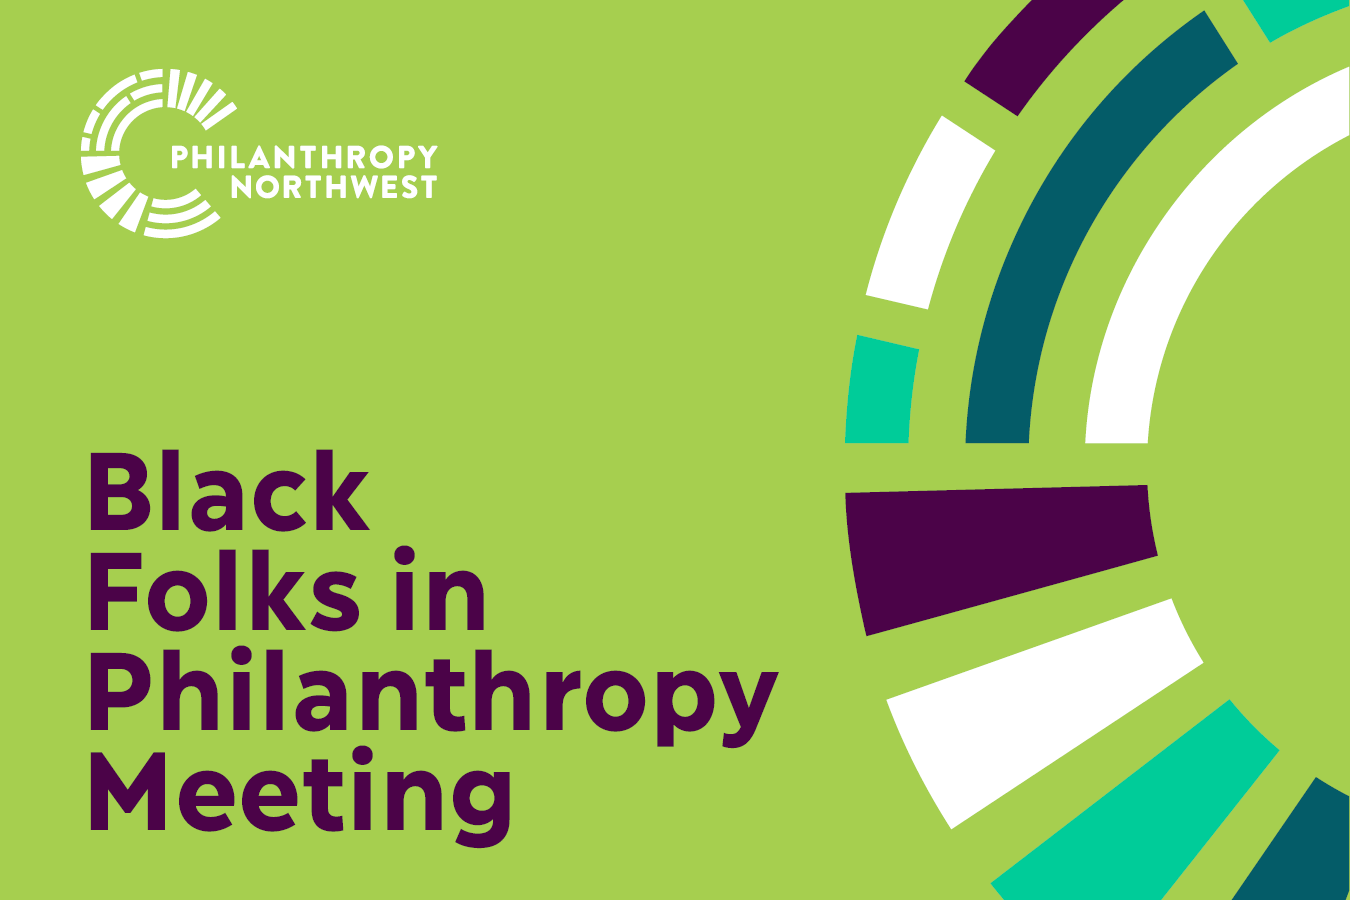 Lime green event banner that says "Black Folks in Philanthropy" and has a colorful half circle design on the side